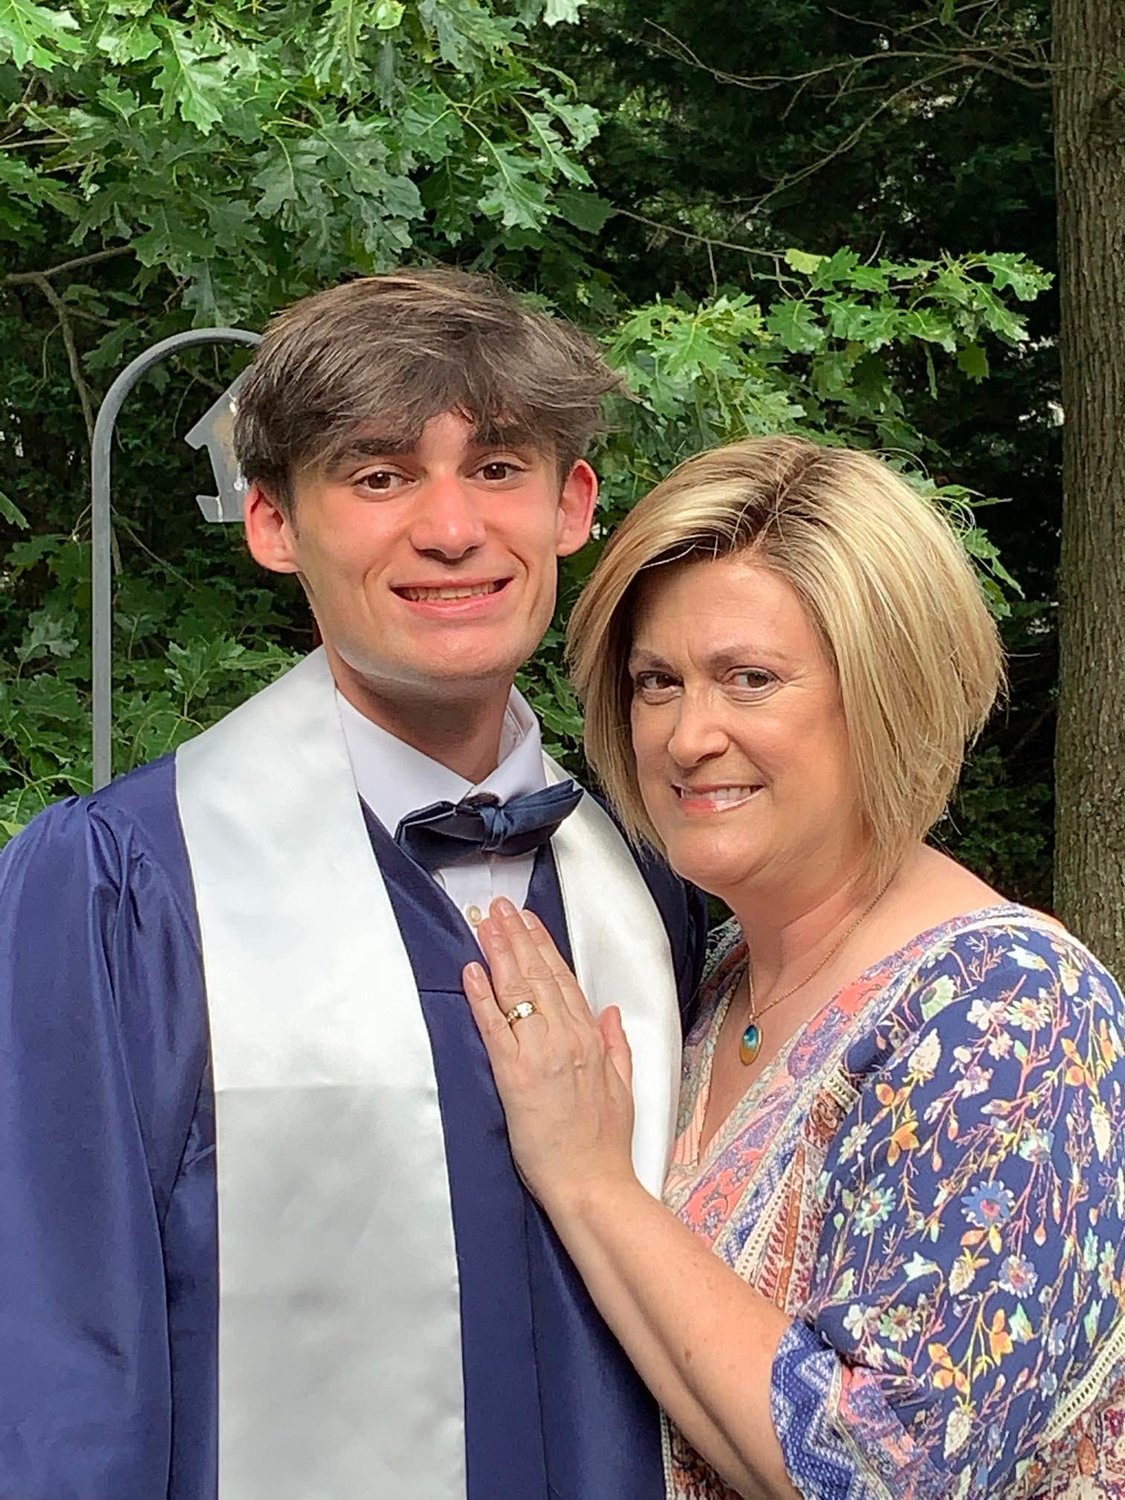 Ryan Sullivan graduated from Severna Park High School in 2021. His mom, a psychiatric nurse practitioner, was among the family members in attendance.